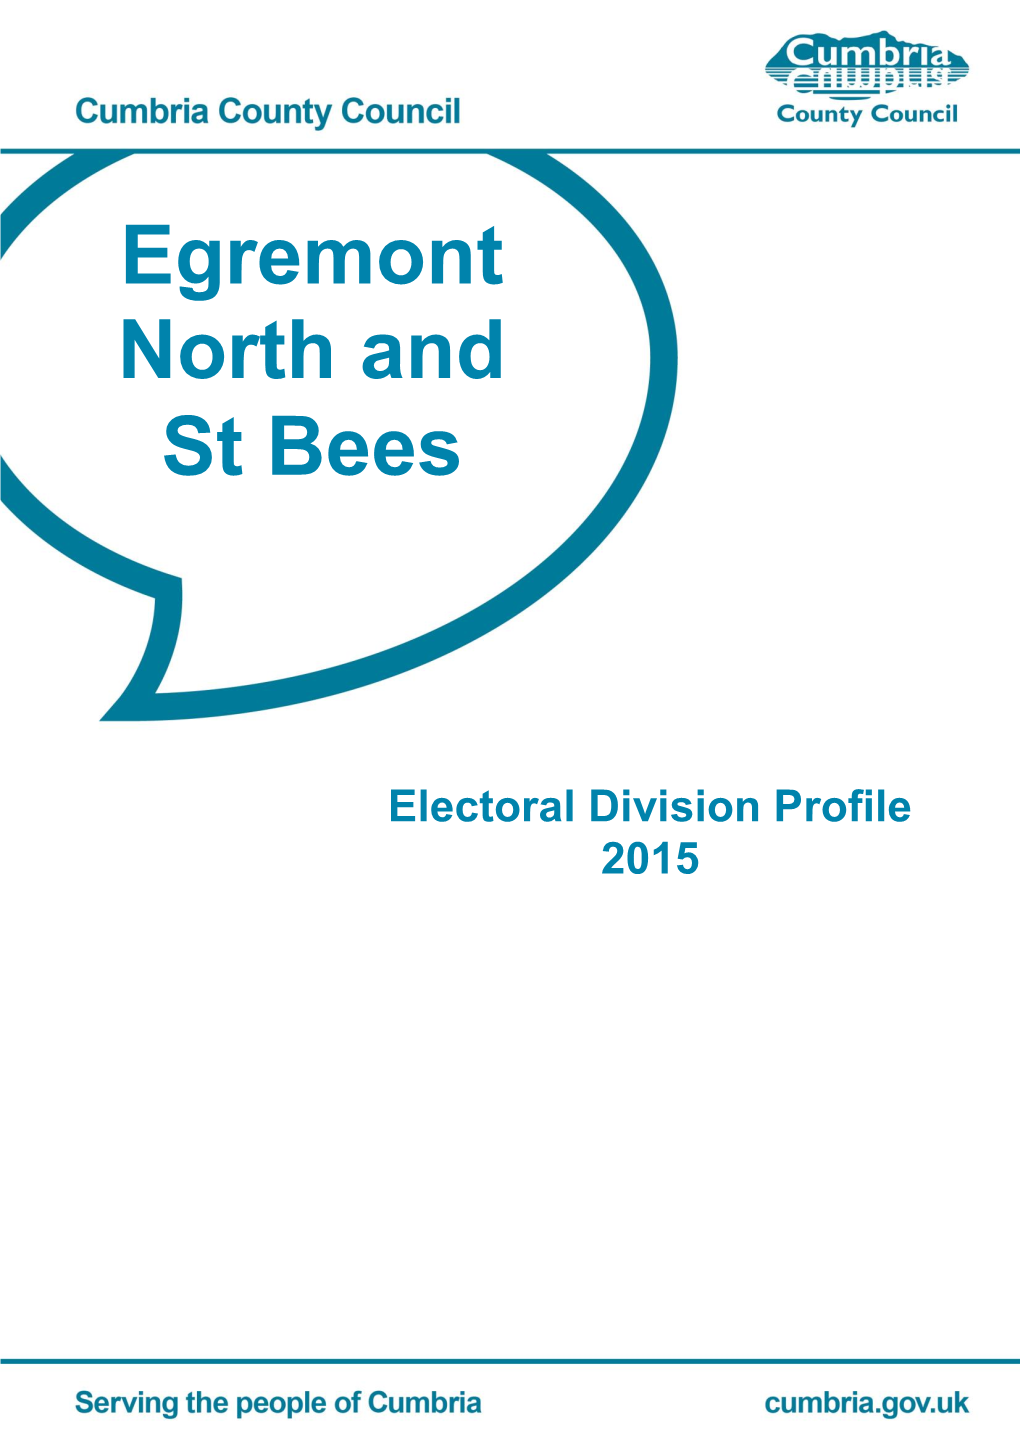 ED Profile Egremont North and St Bees